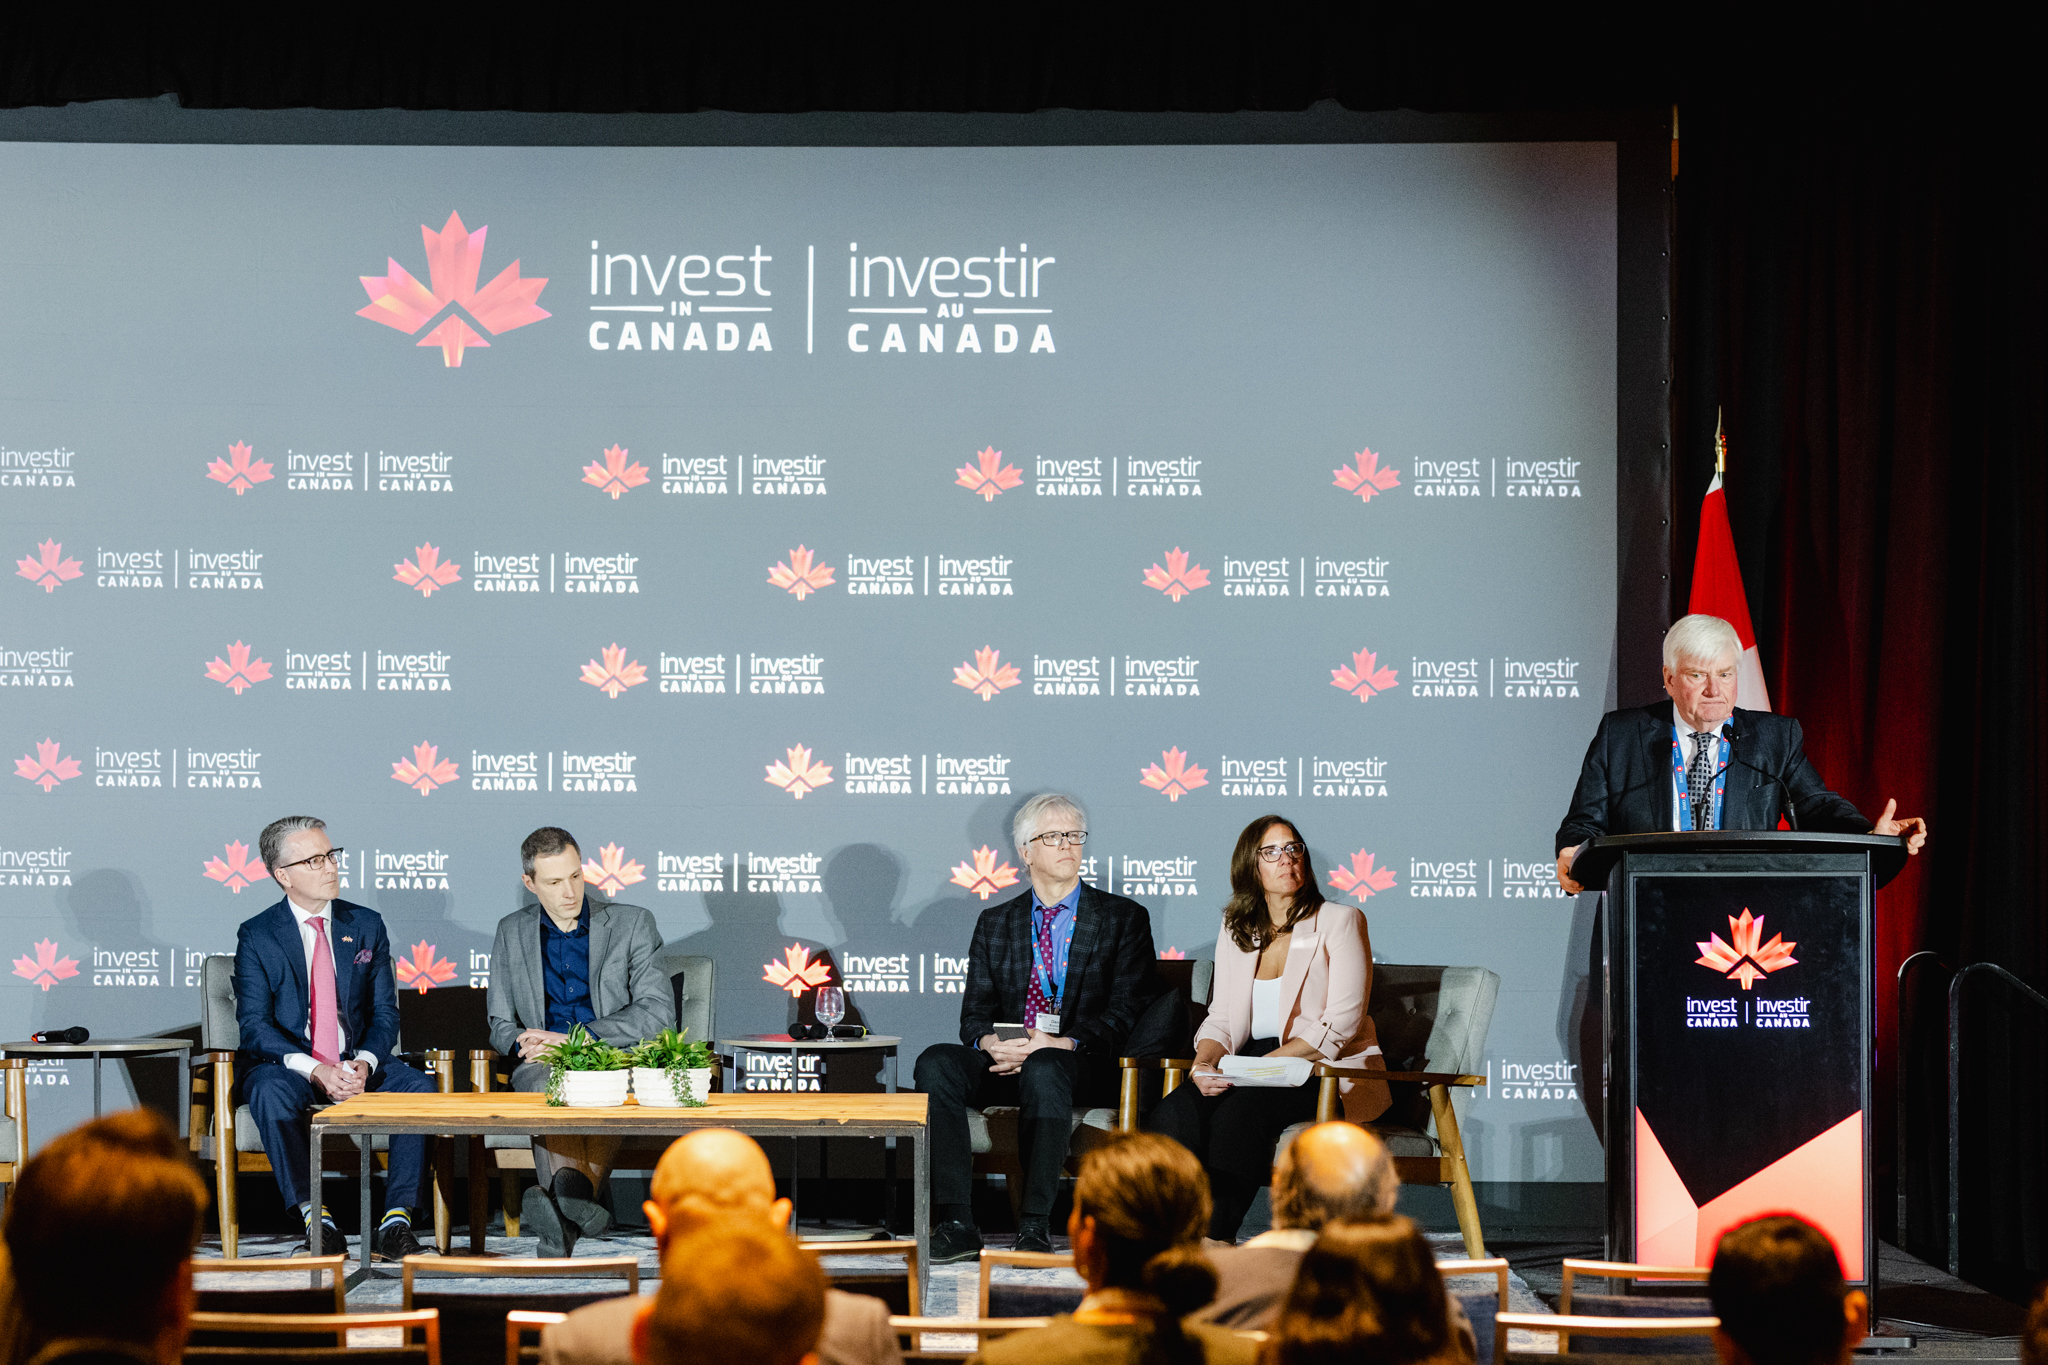 A panel event at Invest Canada with a speaker addressing the audience and four panelists seated onstage, captured by event photography.